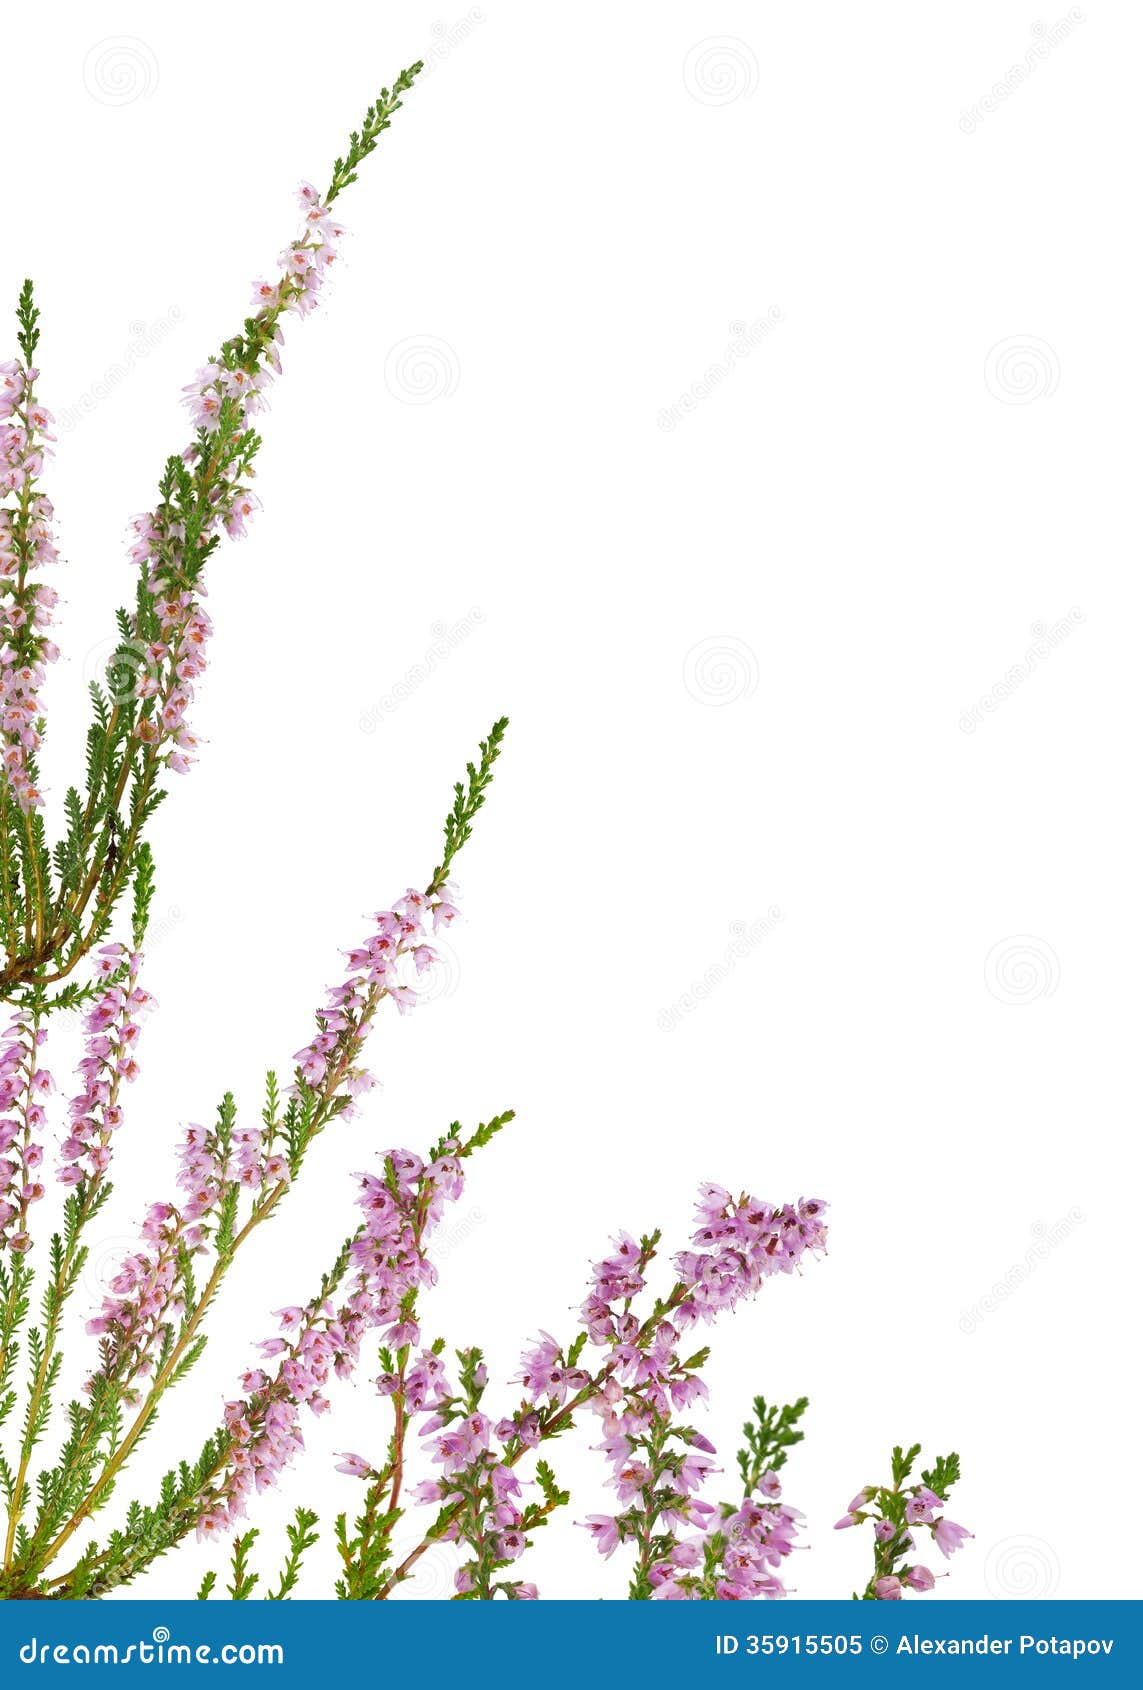 Isolated Pink Blossoming Heather Corner Stock Image